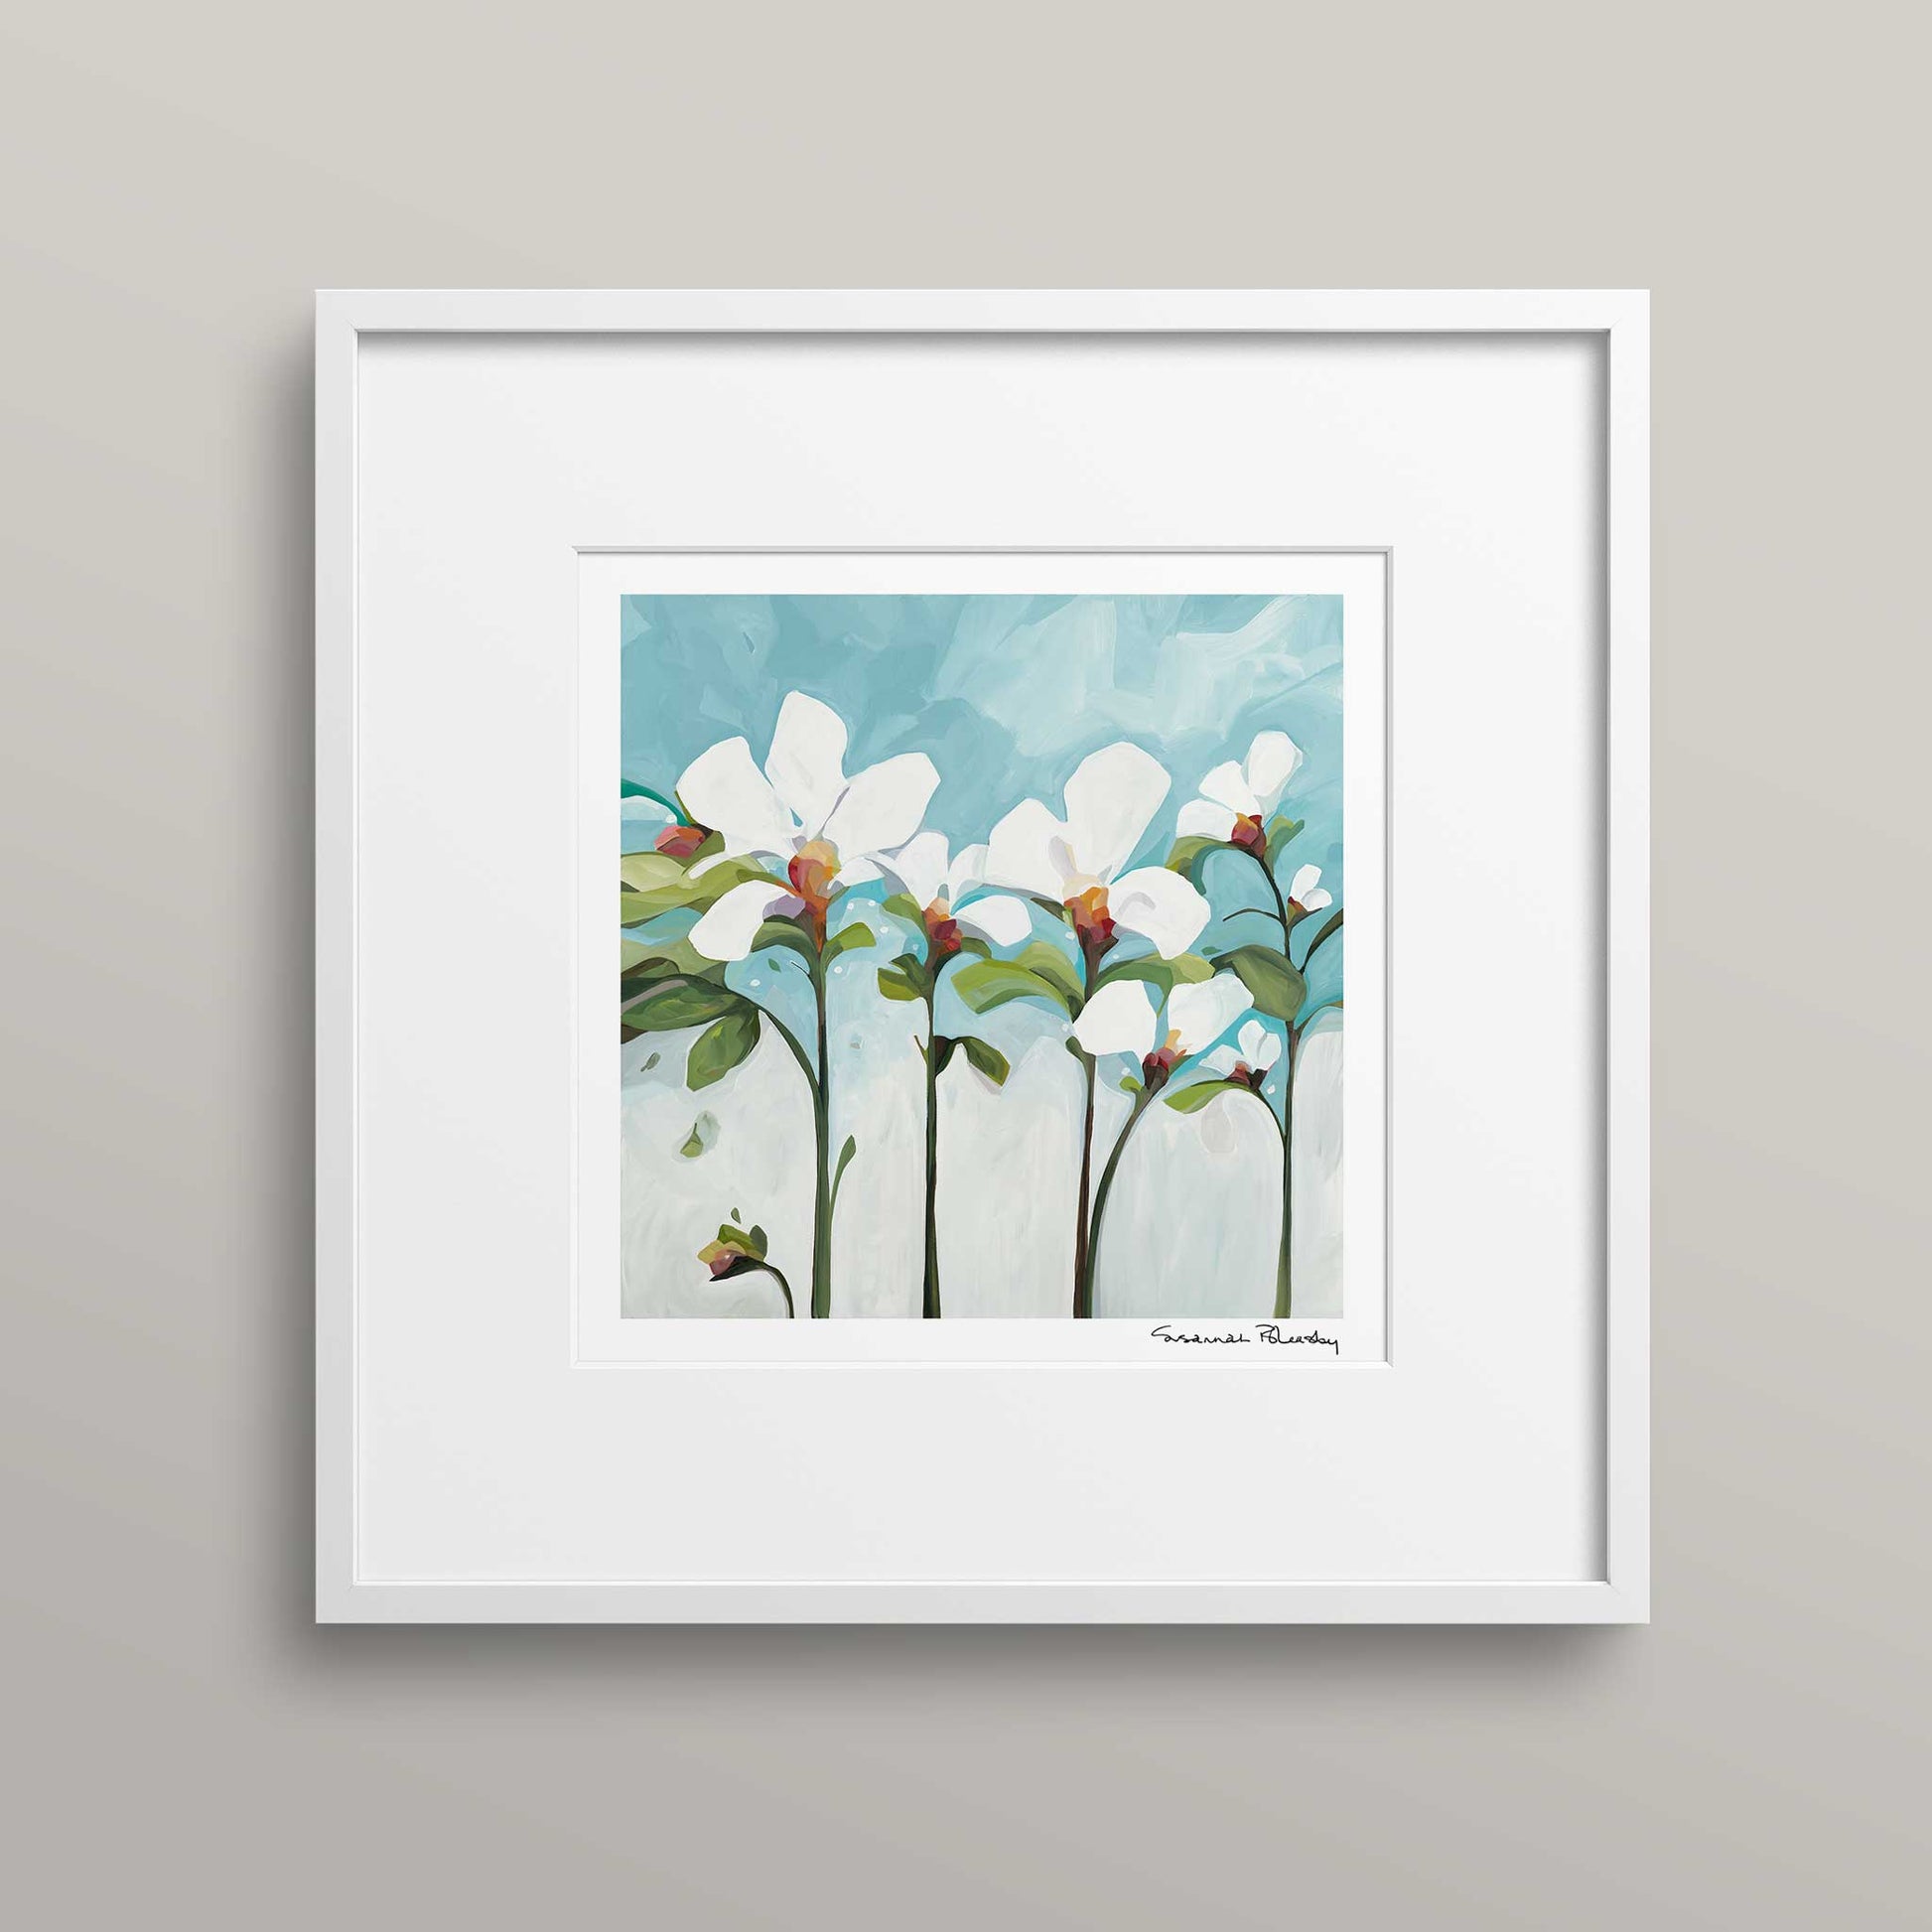 Framed acrylic flower painting print of white flowers on a blue background with green foliage